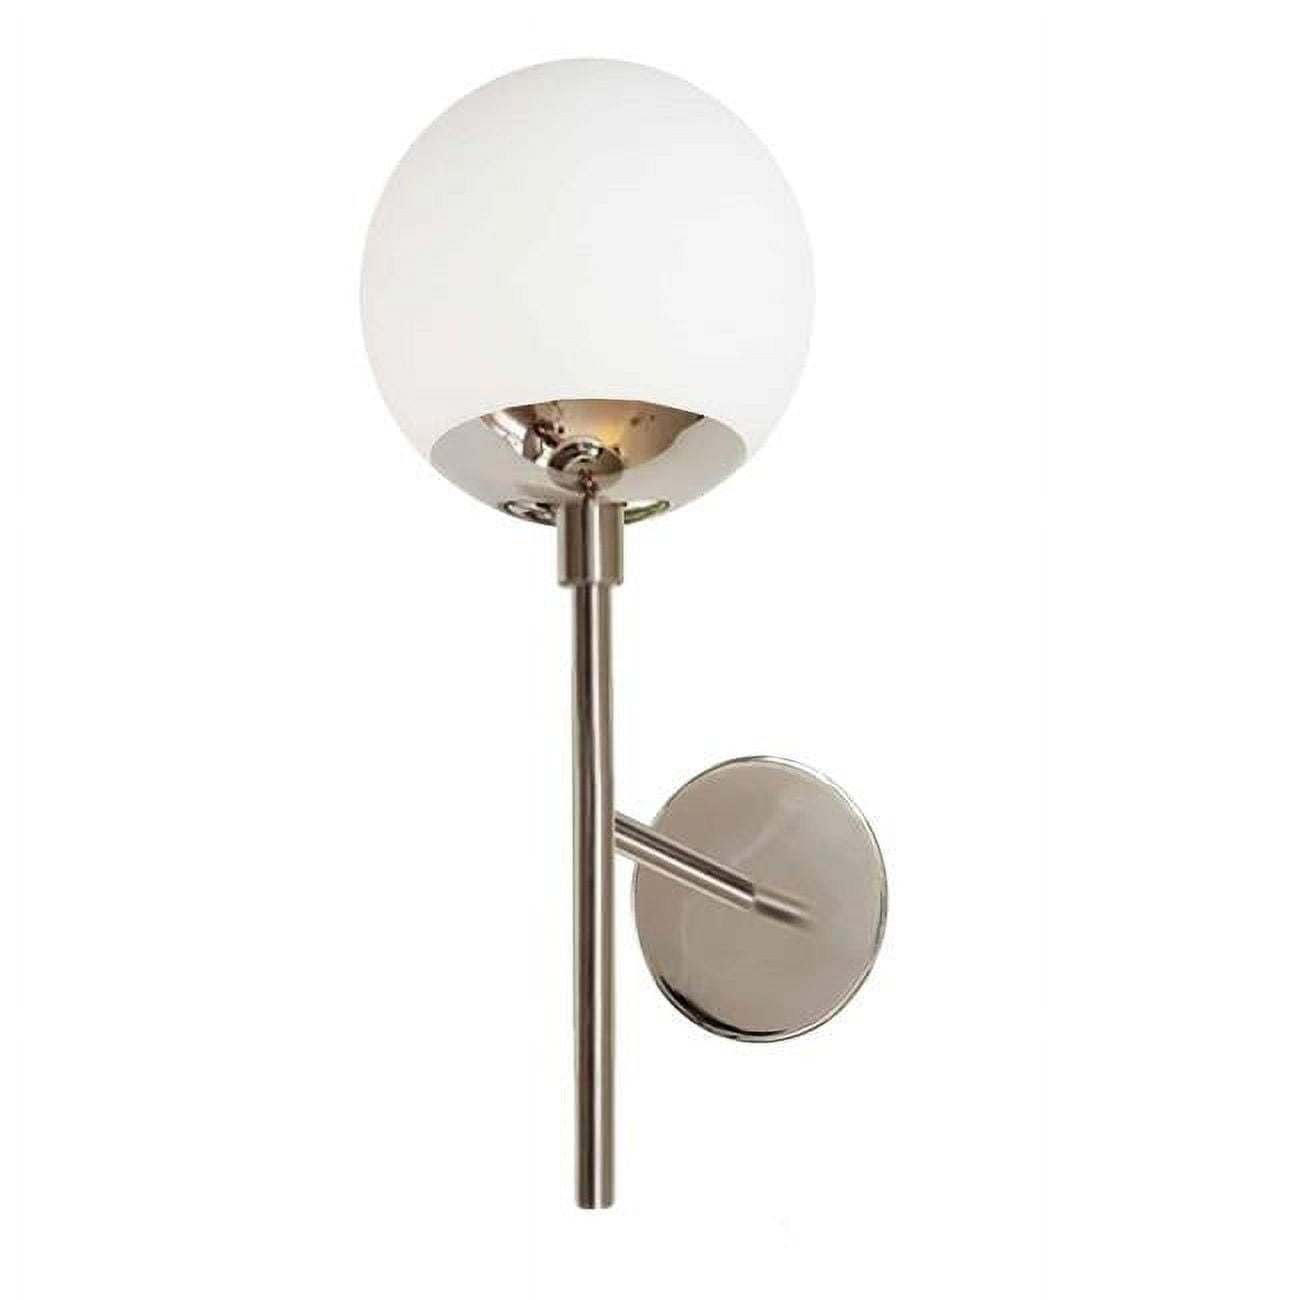 Picture of Dainolite DAY-161W-PC 1 Light Halogen Polished Chrome Wall Sconce with White Glass